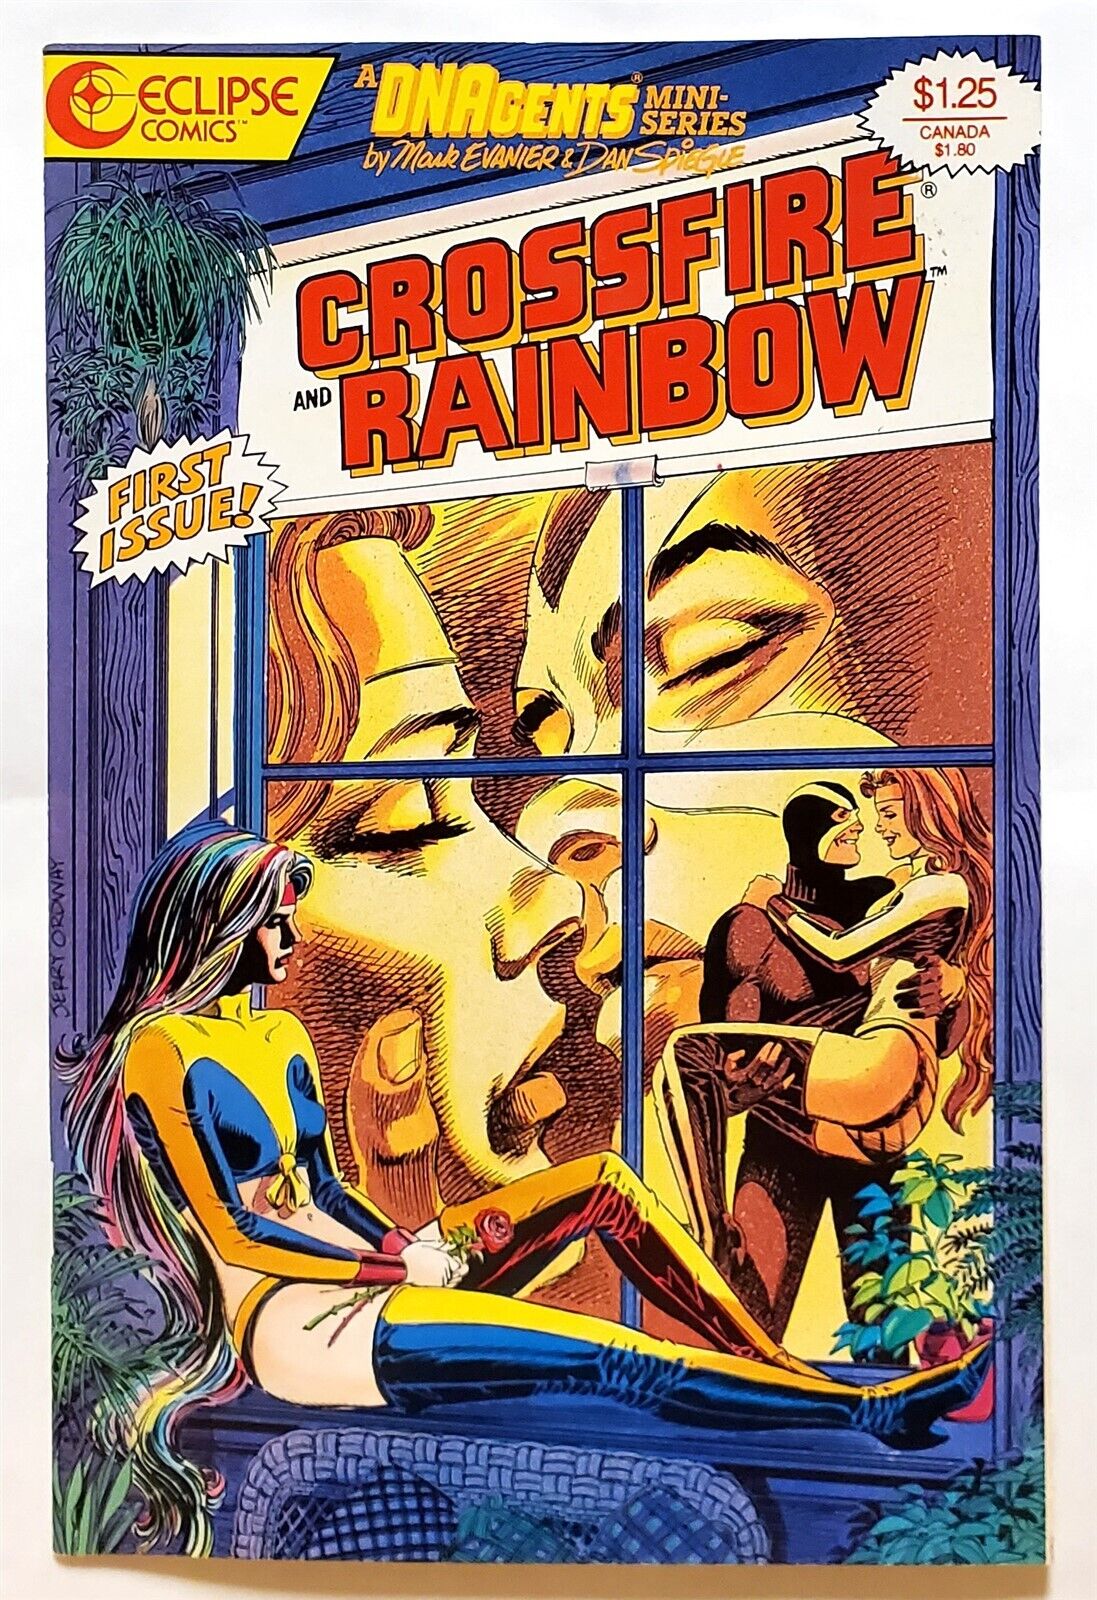 Crossfire and Rainbow #1 (June 1986, Eclipse) 8.0 VF 